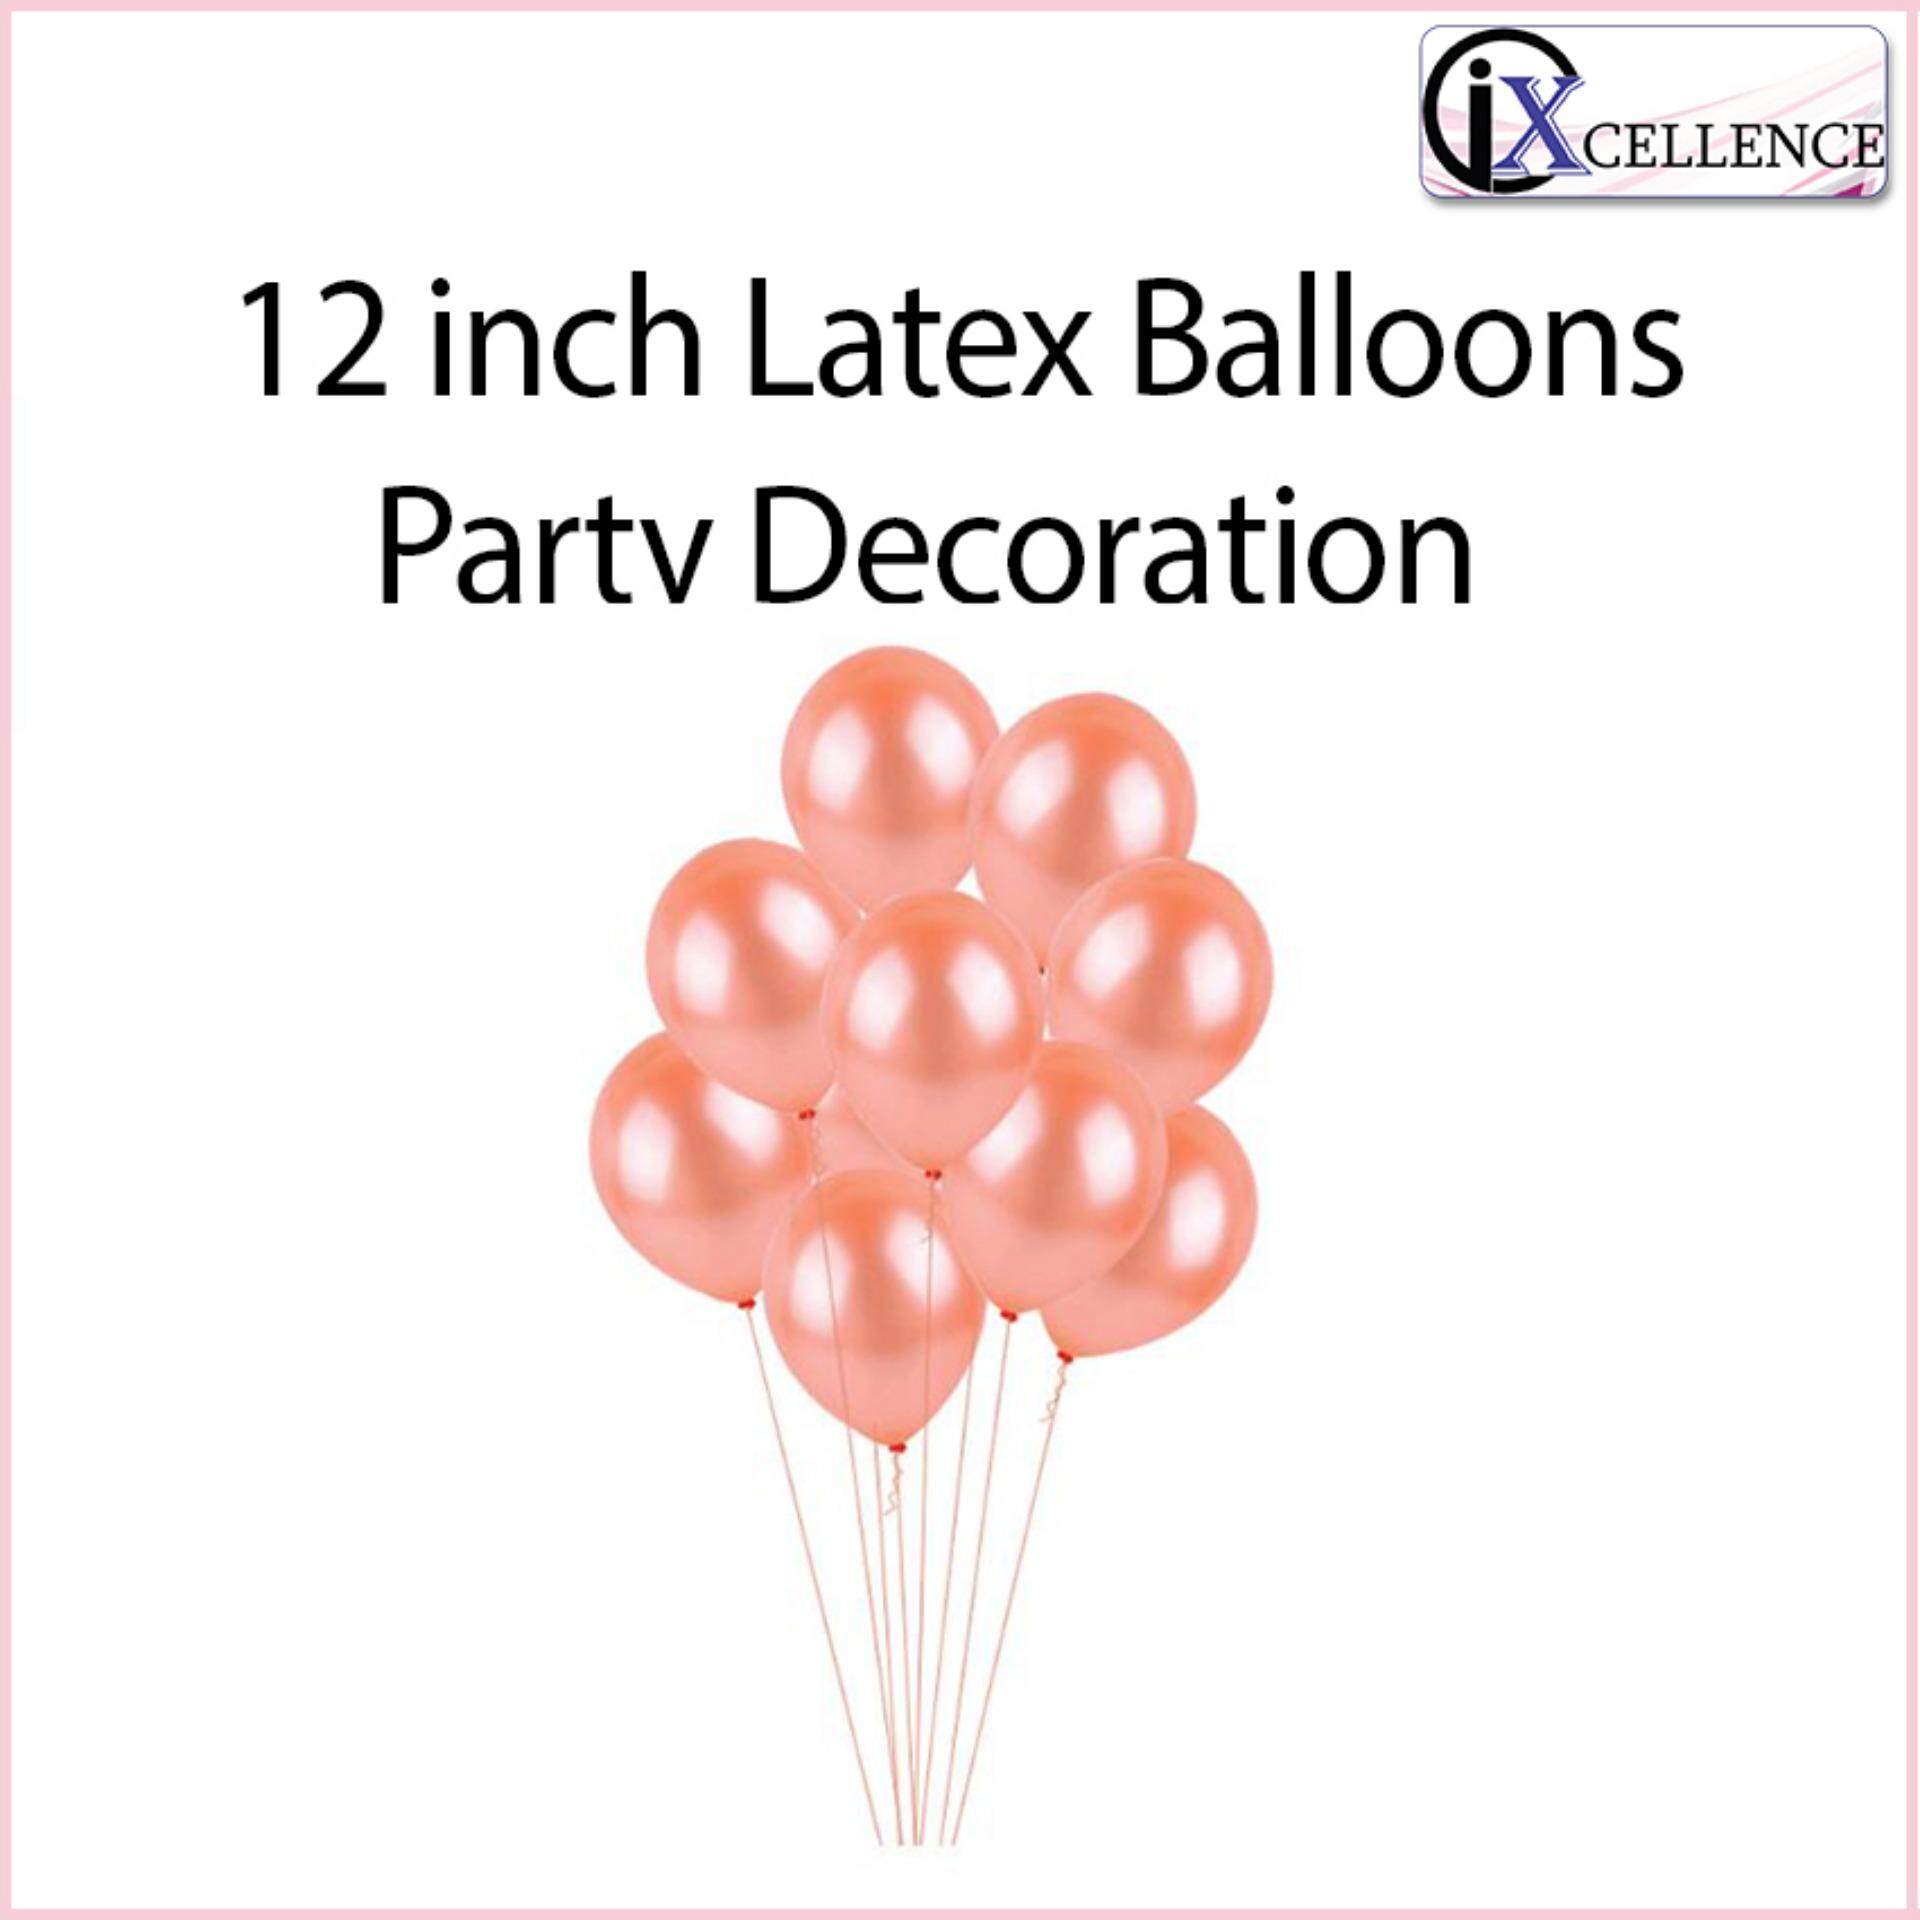 [IX] 12 inch Latex Balloons for Party Decoration 1 pcs (Rose Gold)